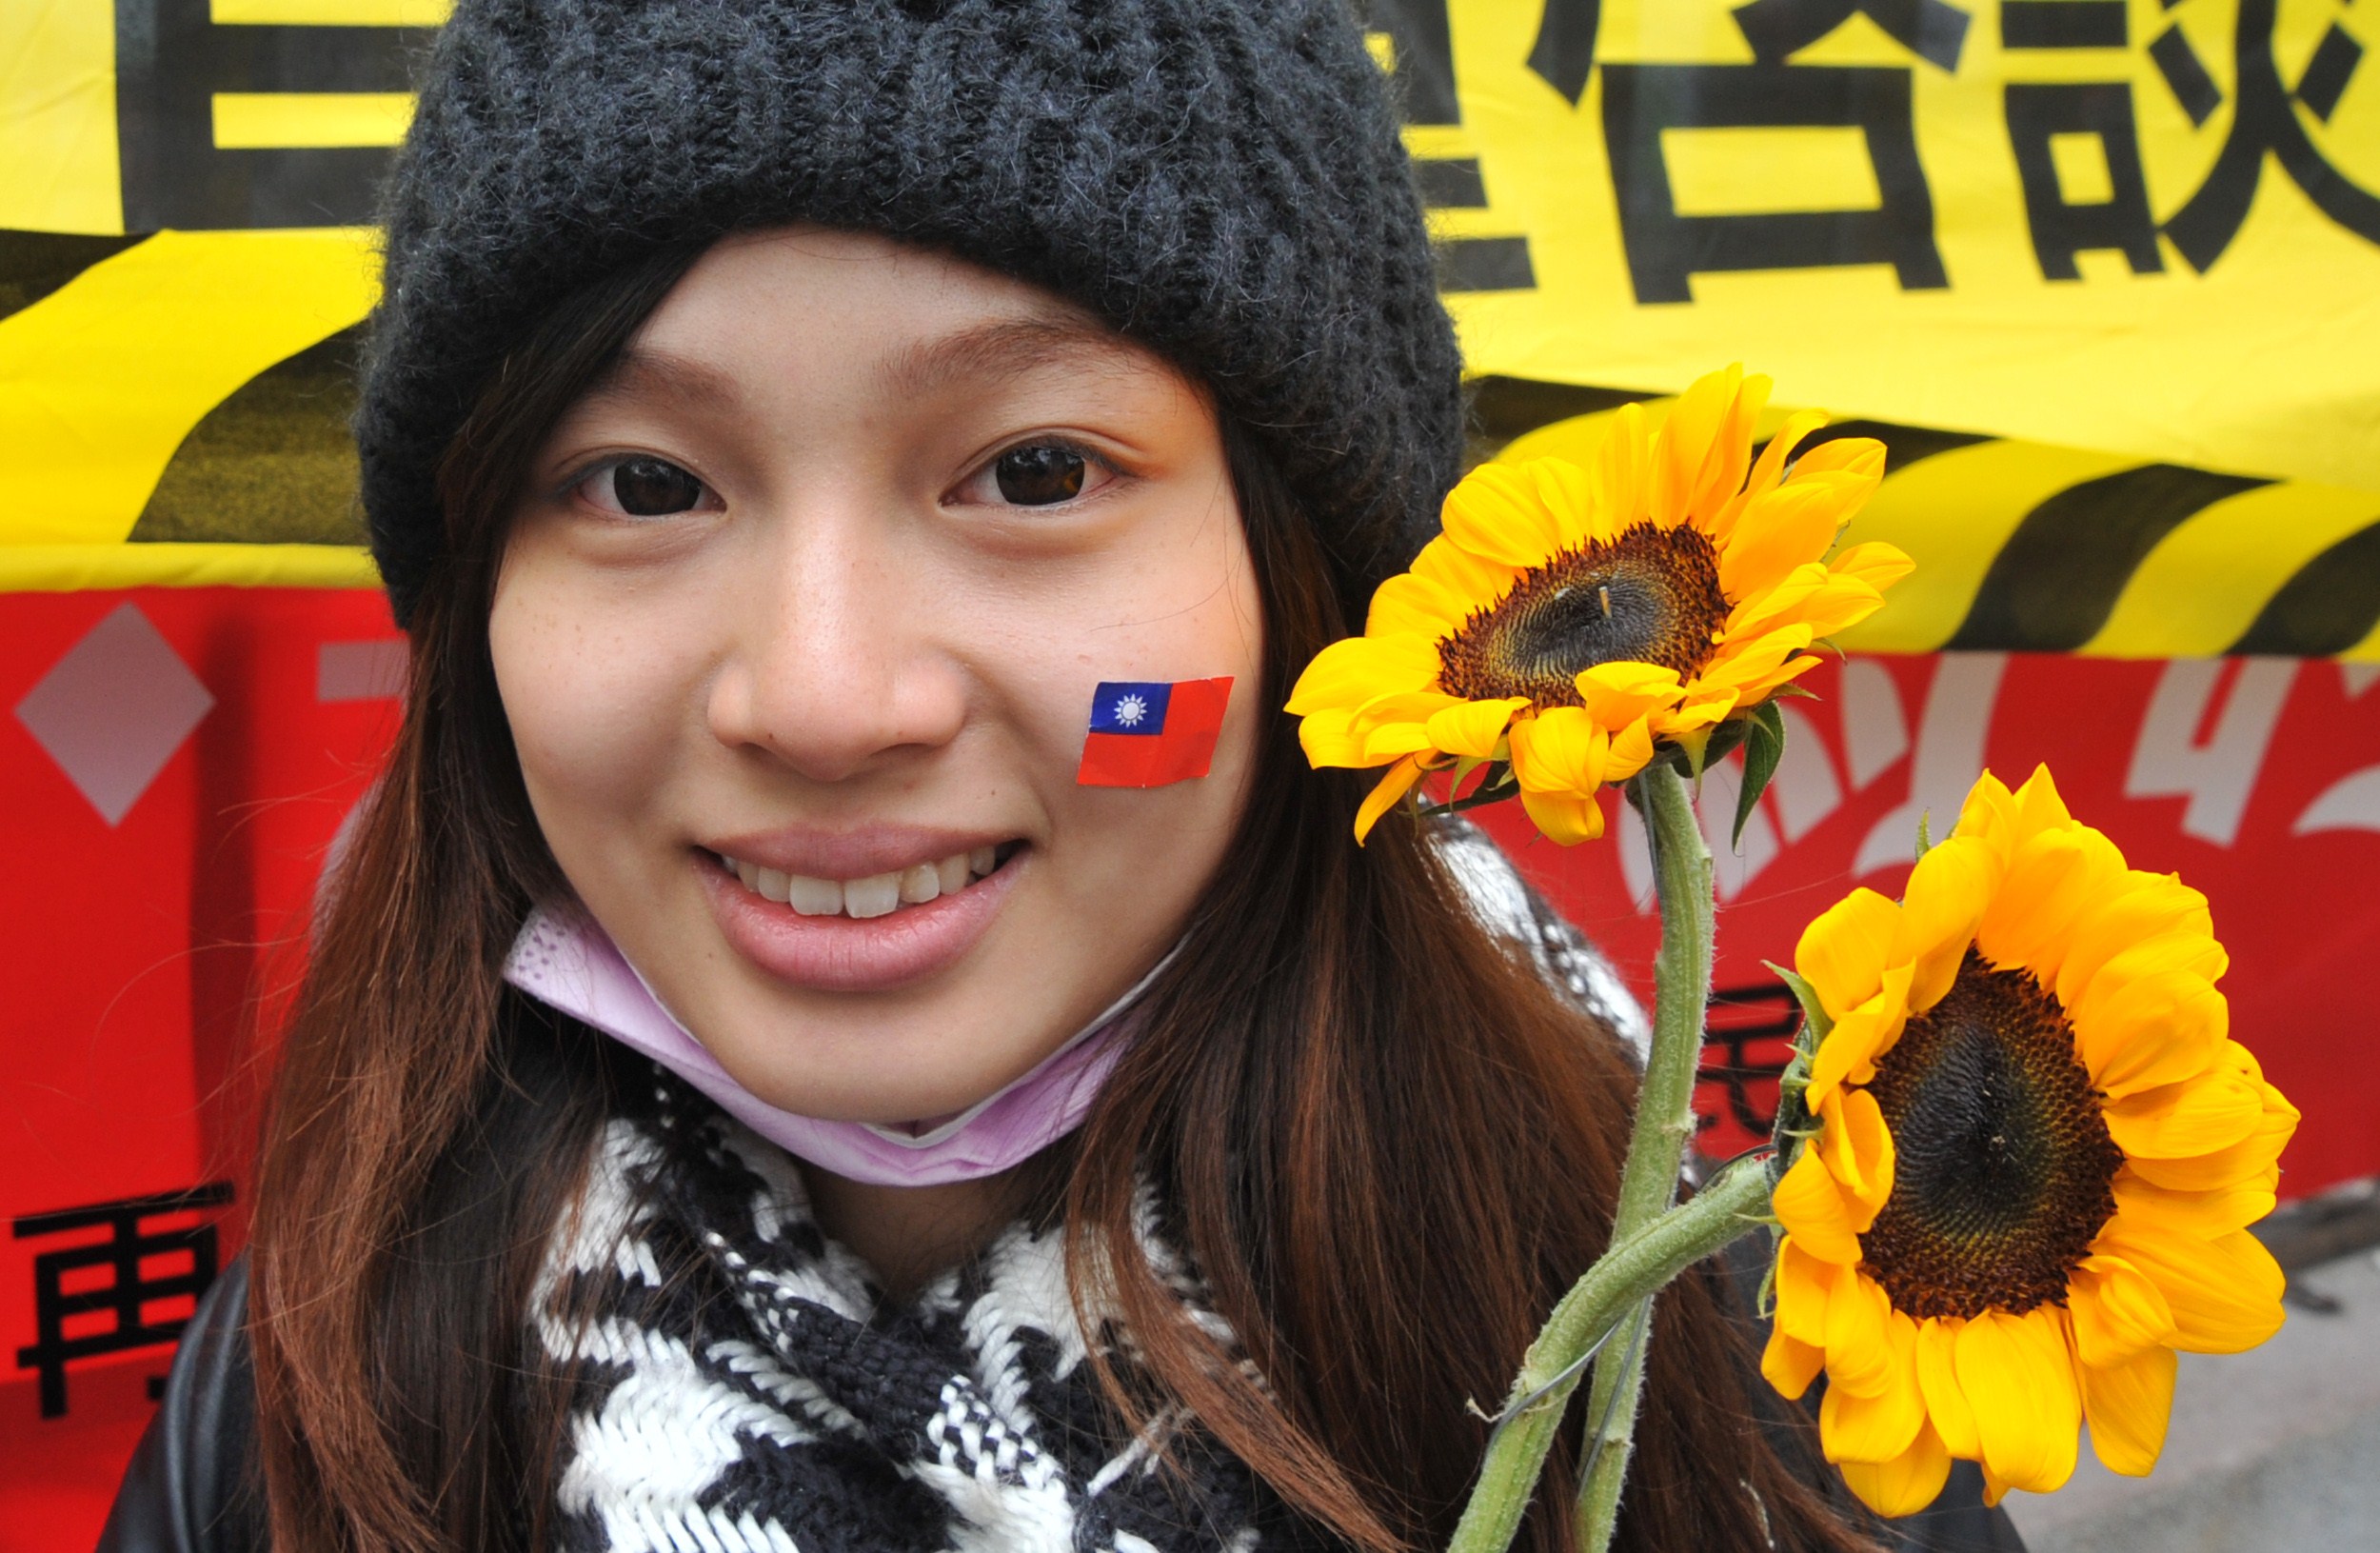 An activist holds sunflowers and wears a sticker of Taiwan's national flag on her face in support of student protesters occupying the parliament building in Taipei on March 21, 2014 (AFP/Getty Images)